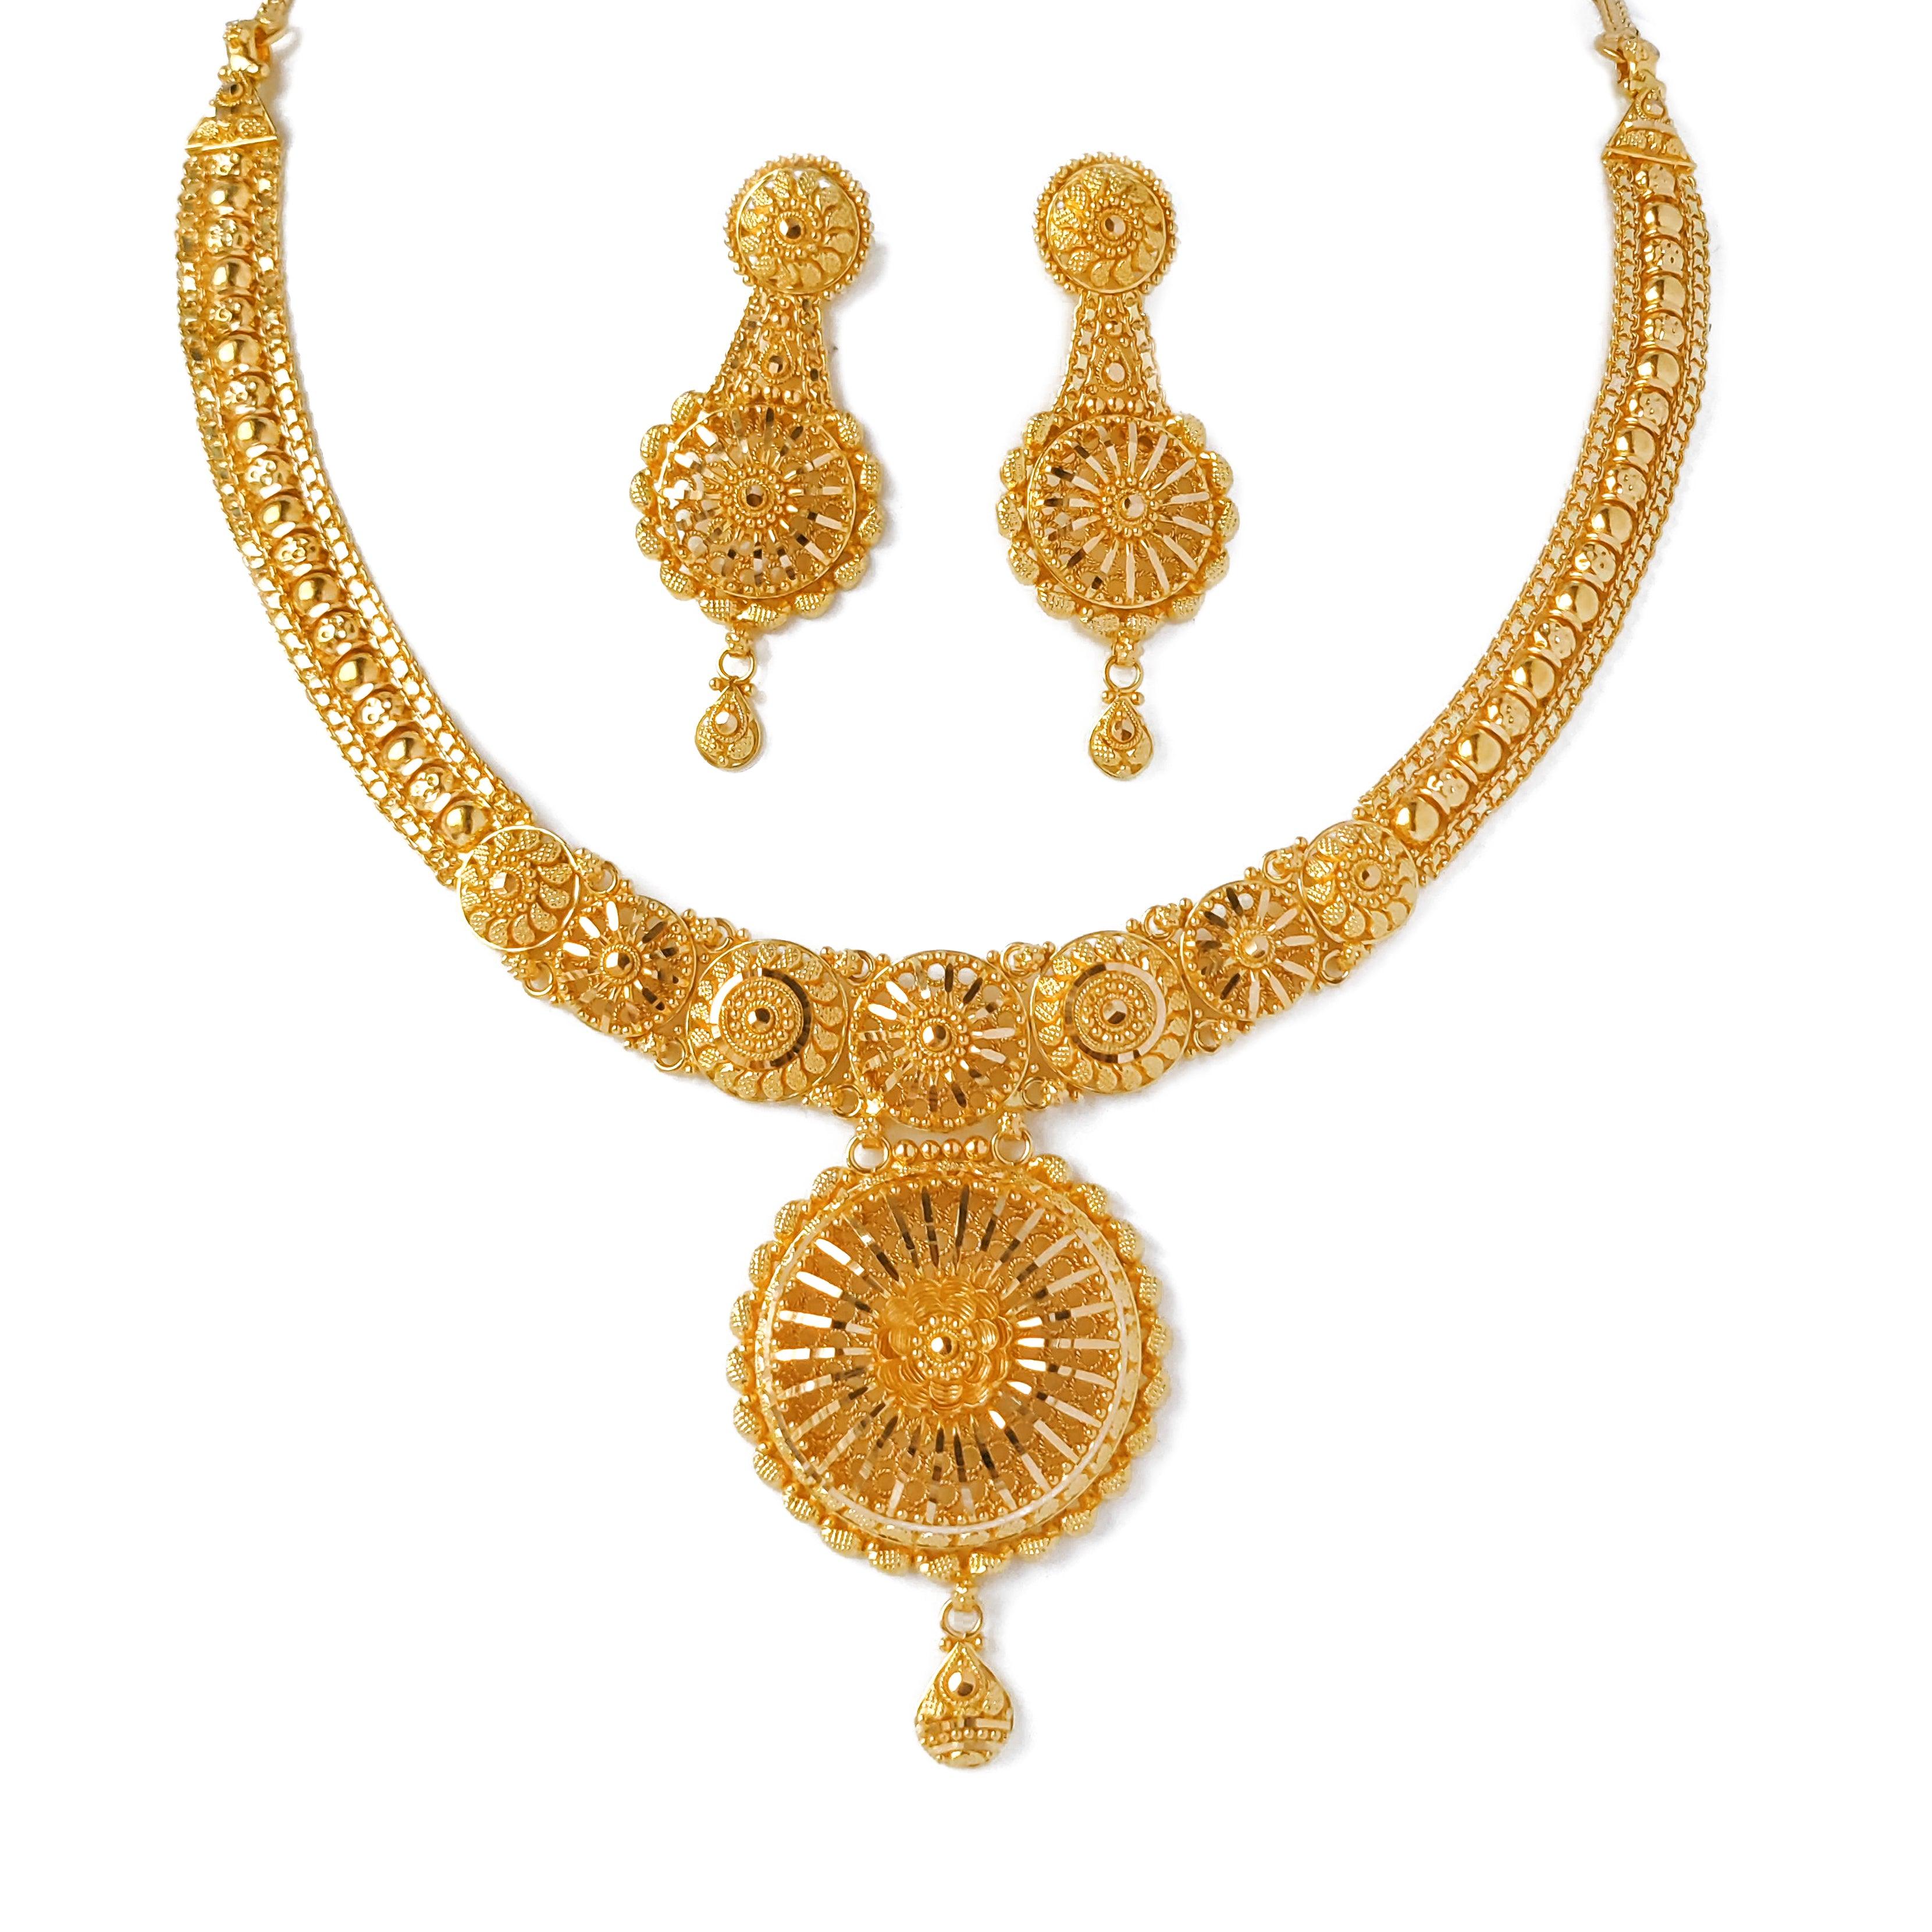 22ct Gold Filigree Jali Necklace and Earring Set (35.9g) N&E-8232 - Minar Jewellers